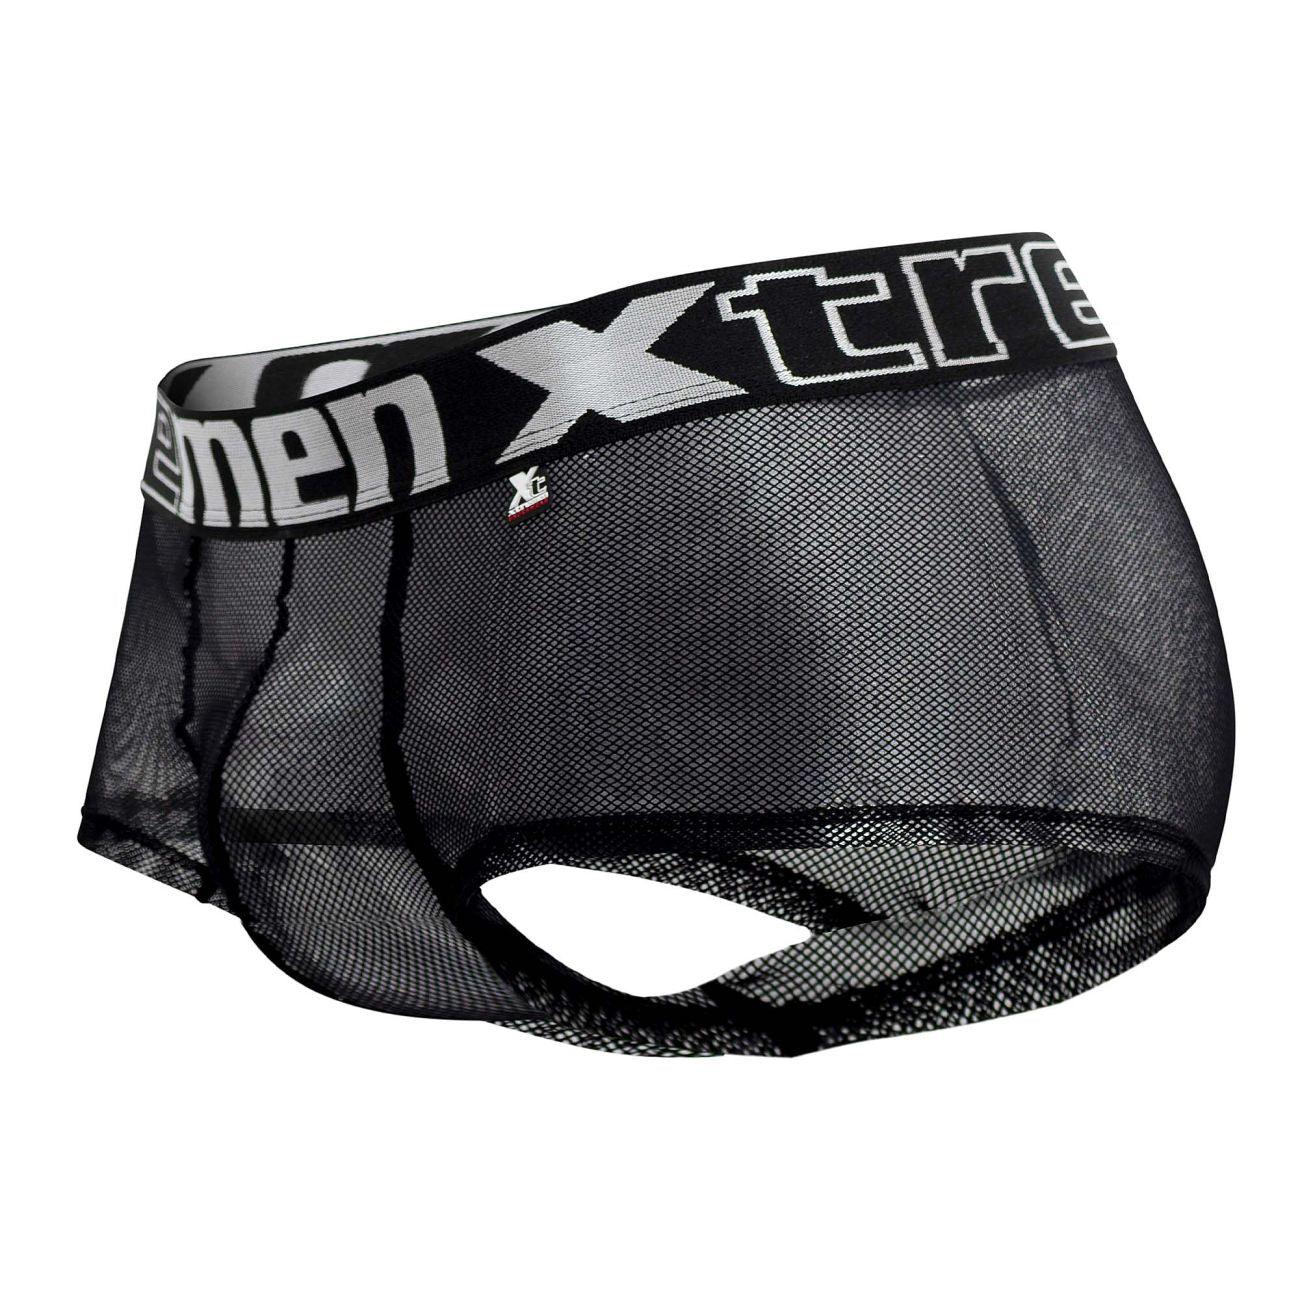 image of product,Mesh Trunks - SEXYEONE